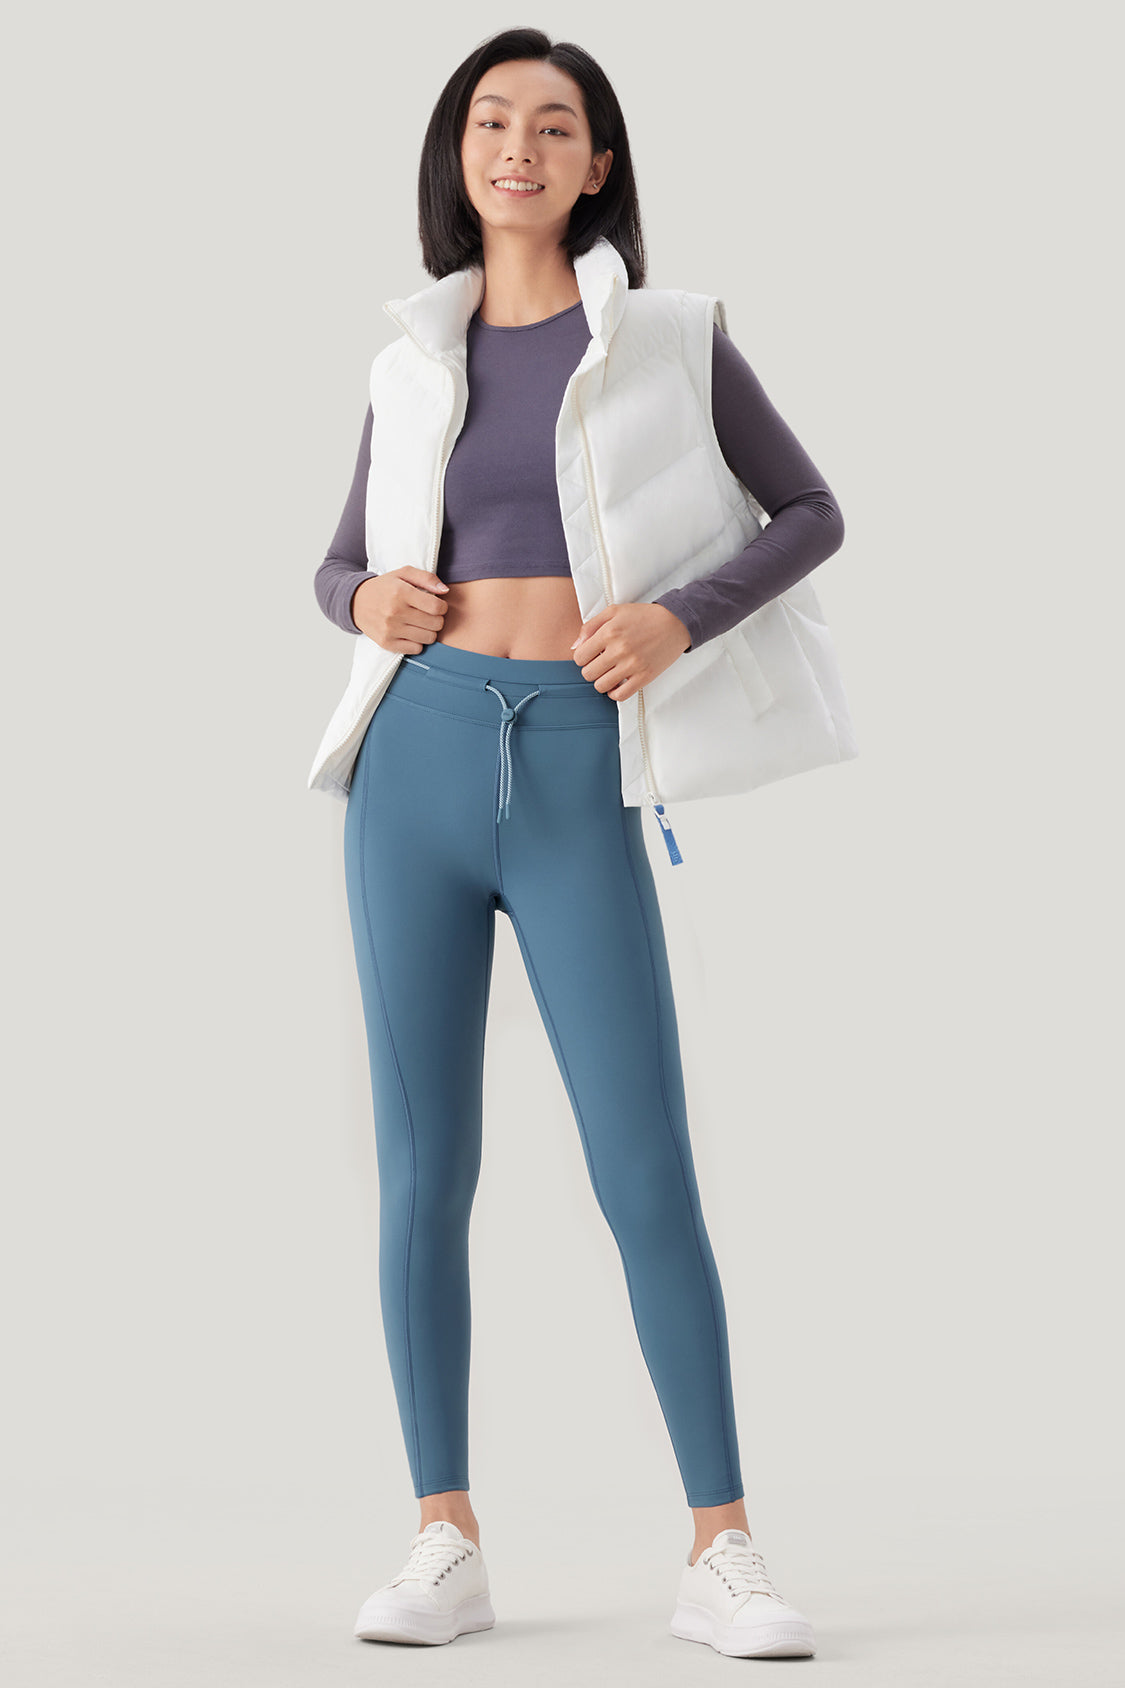 Lululemon Cold Weather Run Gear Reviews - Agent Athletica